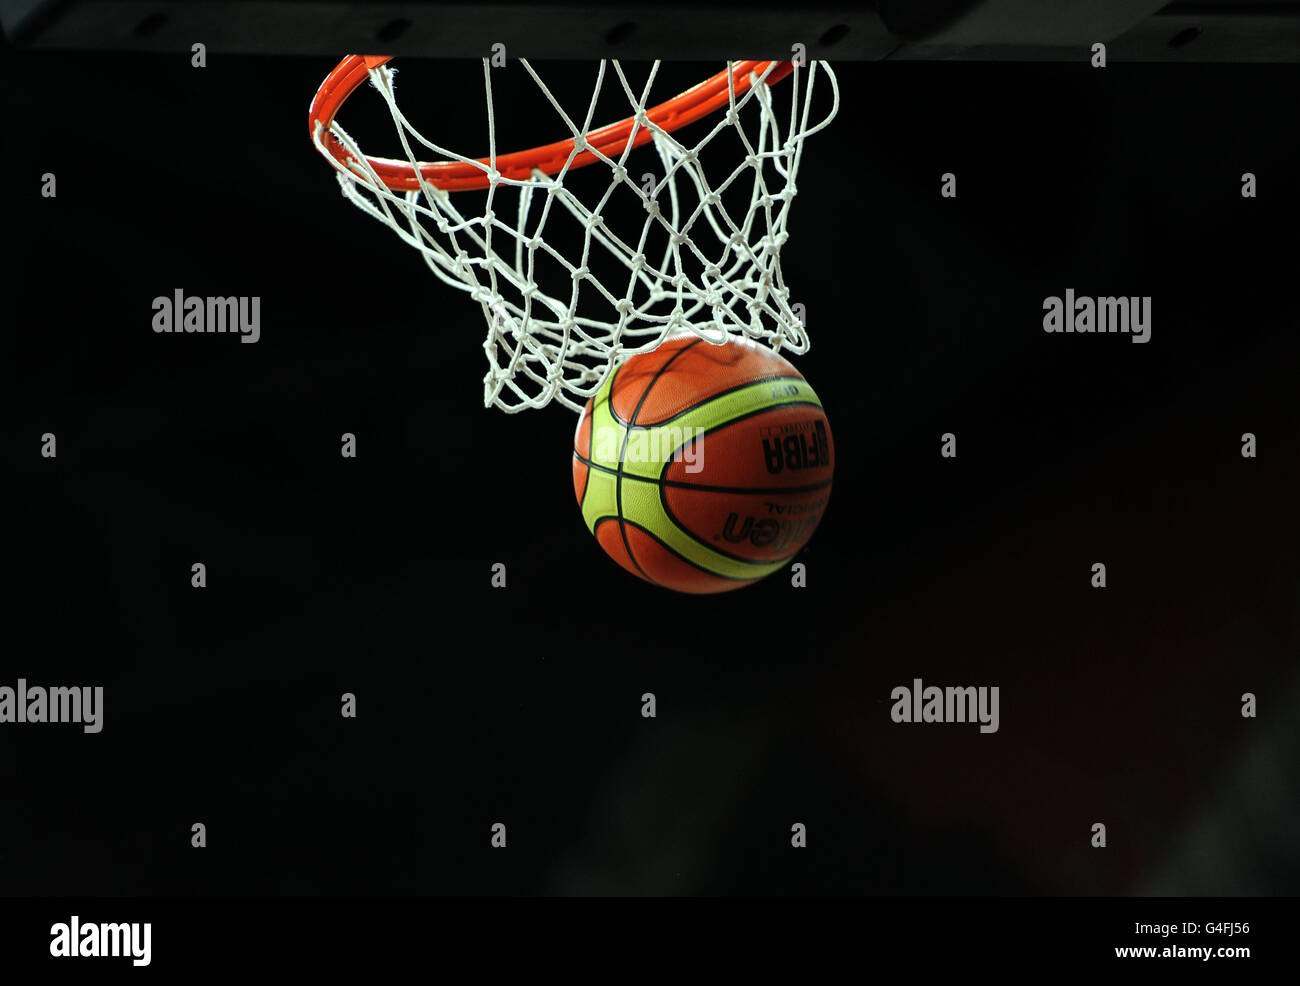 A basketball goes through the hoop during the match between Great Britain and Australia during London Invitational International at the Basketball Arena, in the Olympic Park, London. Stock Photo